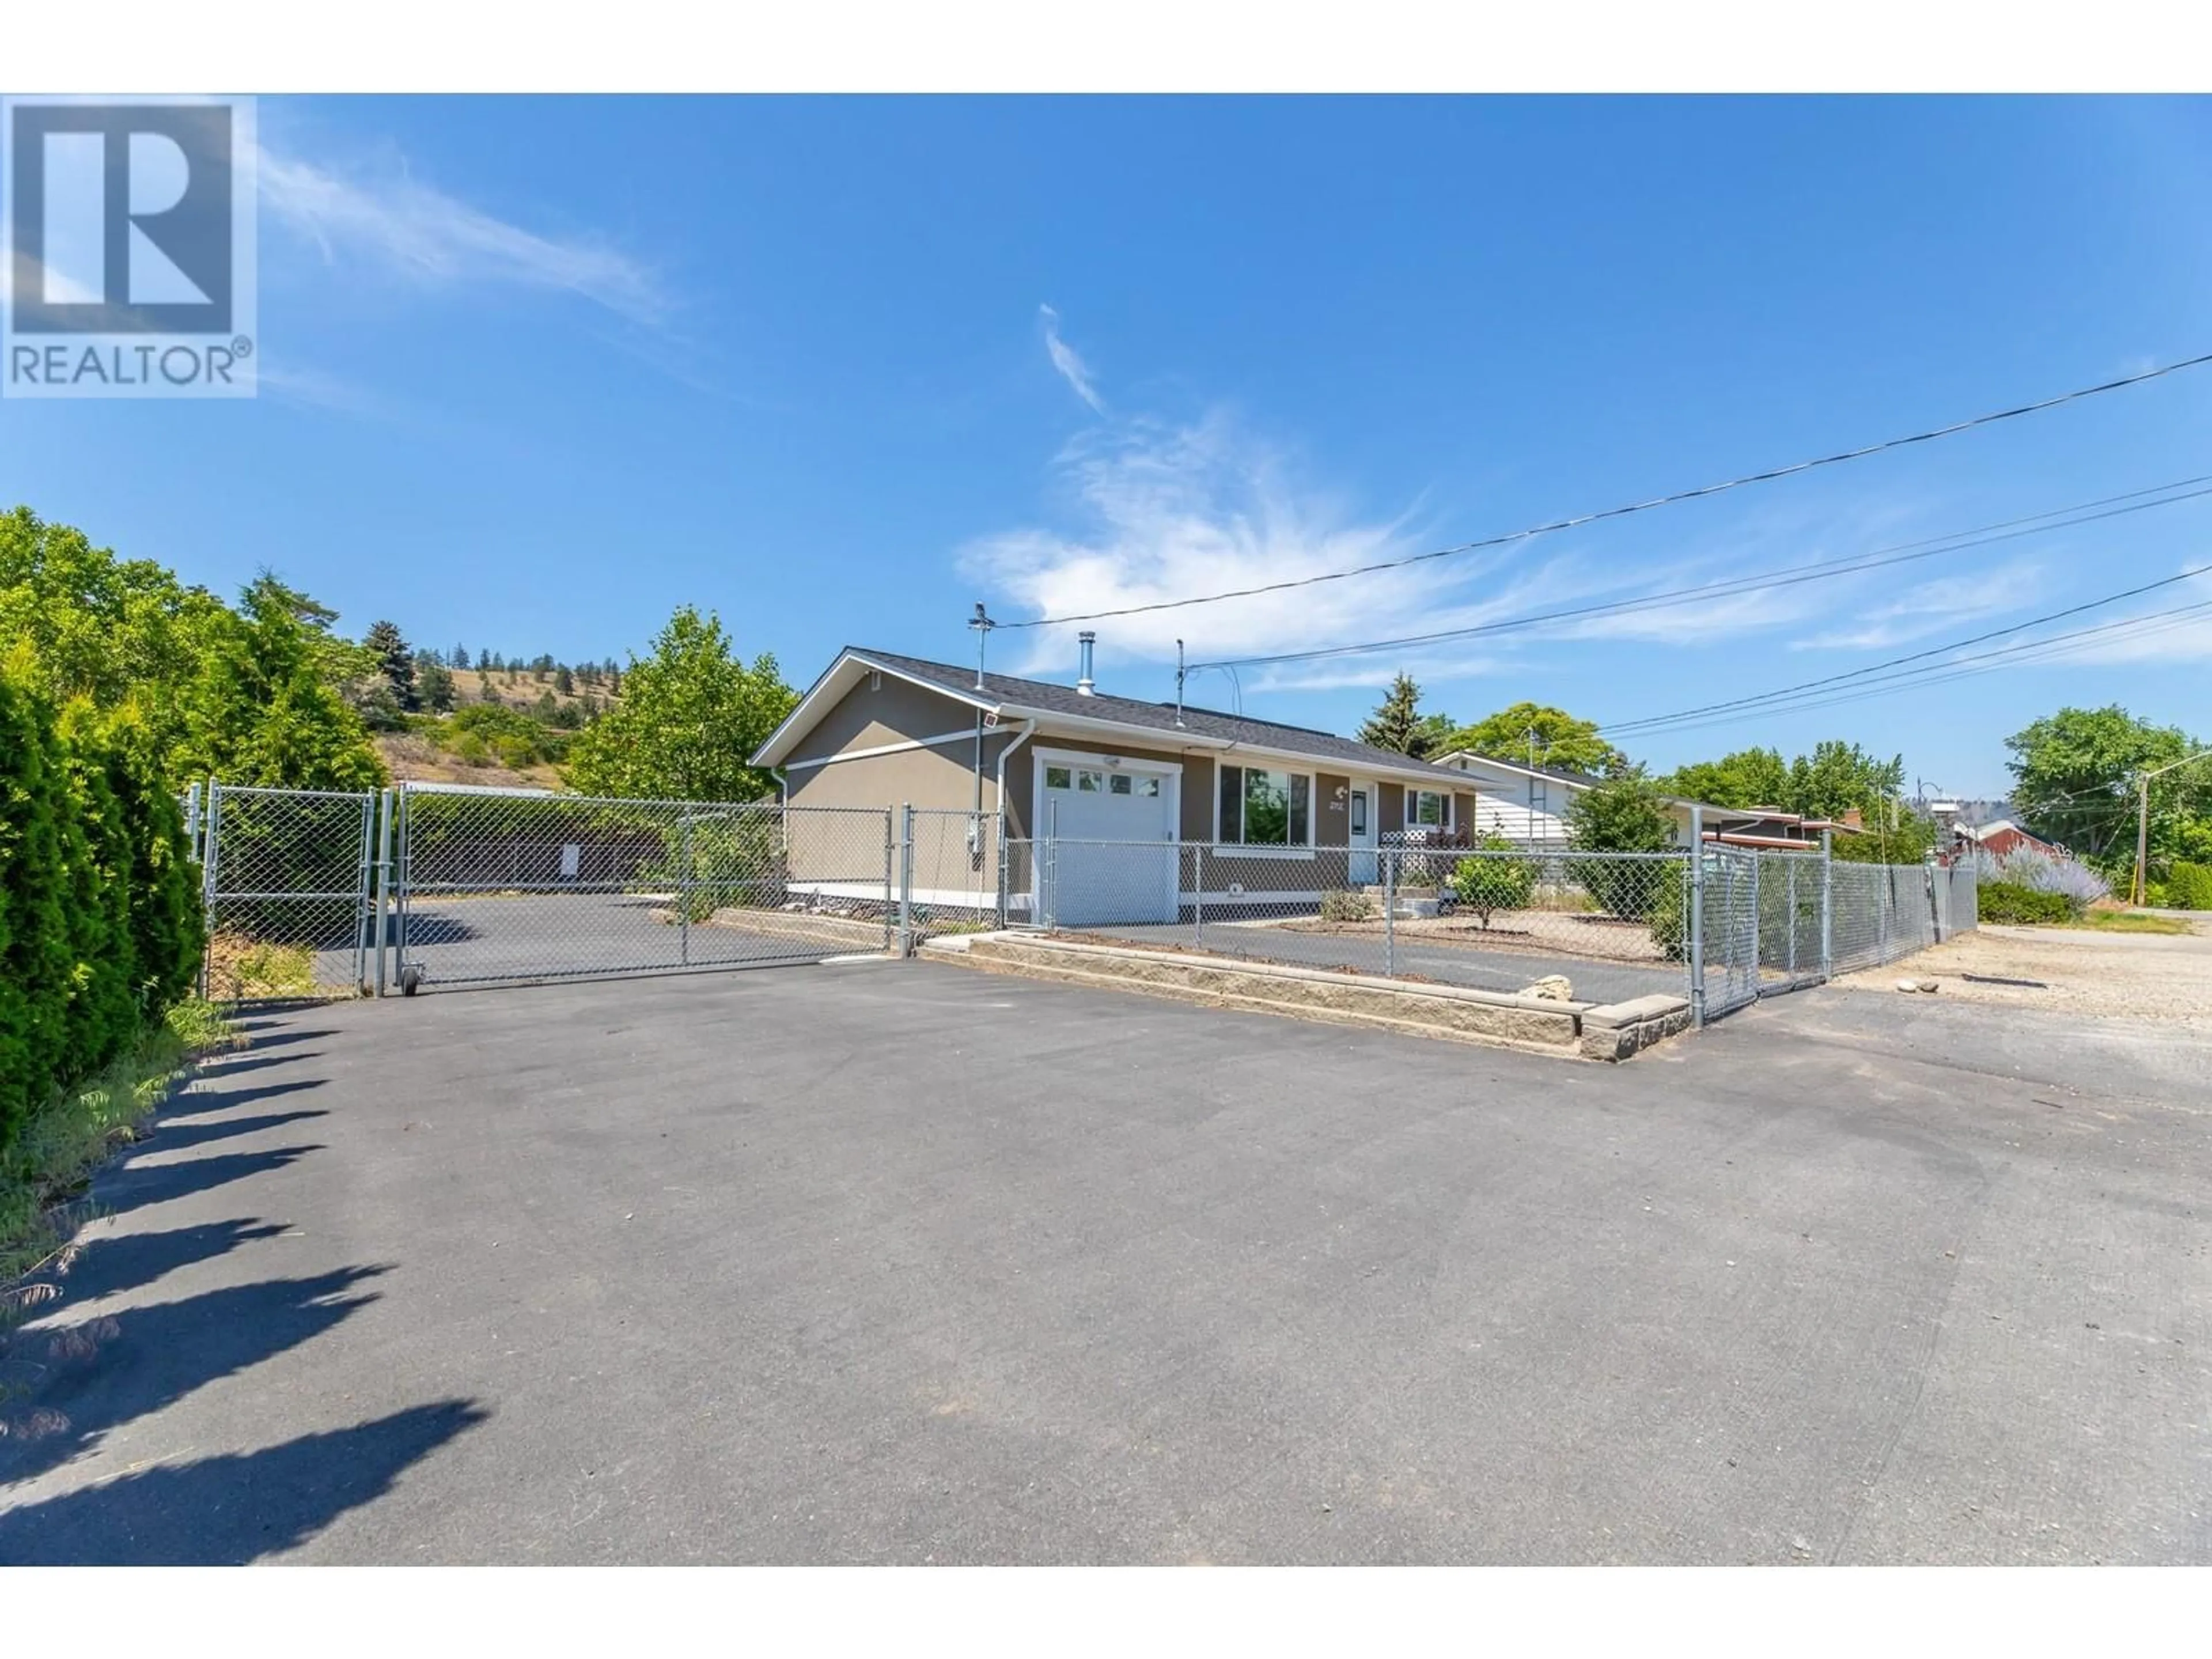 Fenced yard for 12410 Sinclair Road, Summerland British Columbia V0H1Z8